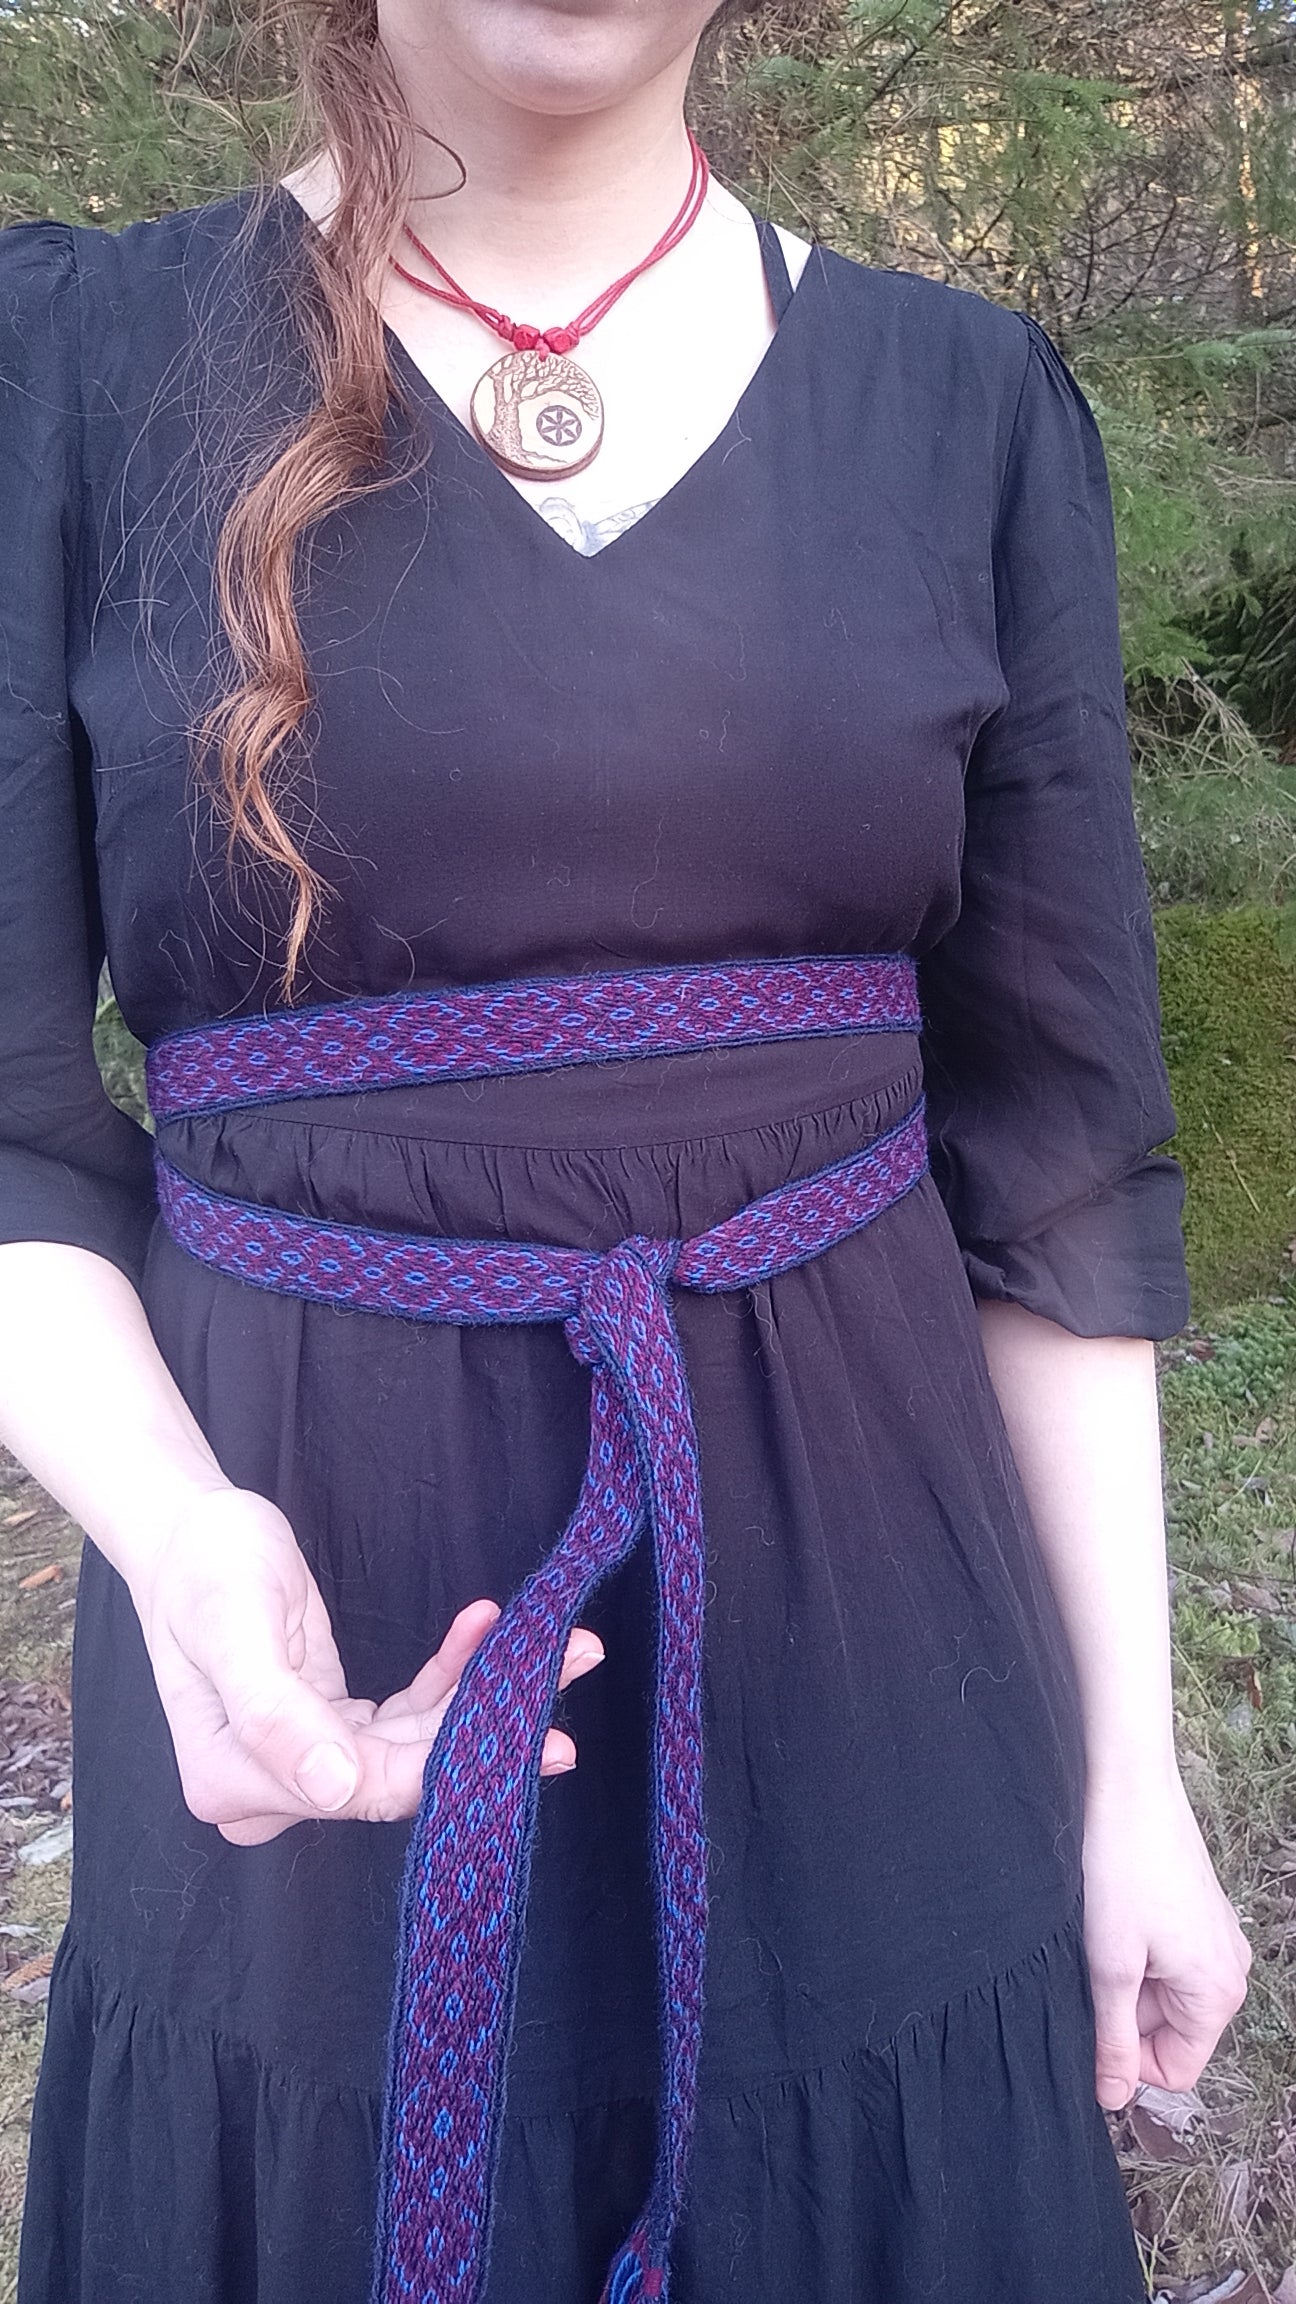 Belt in bright blue and purple